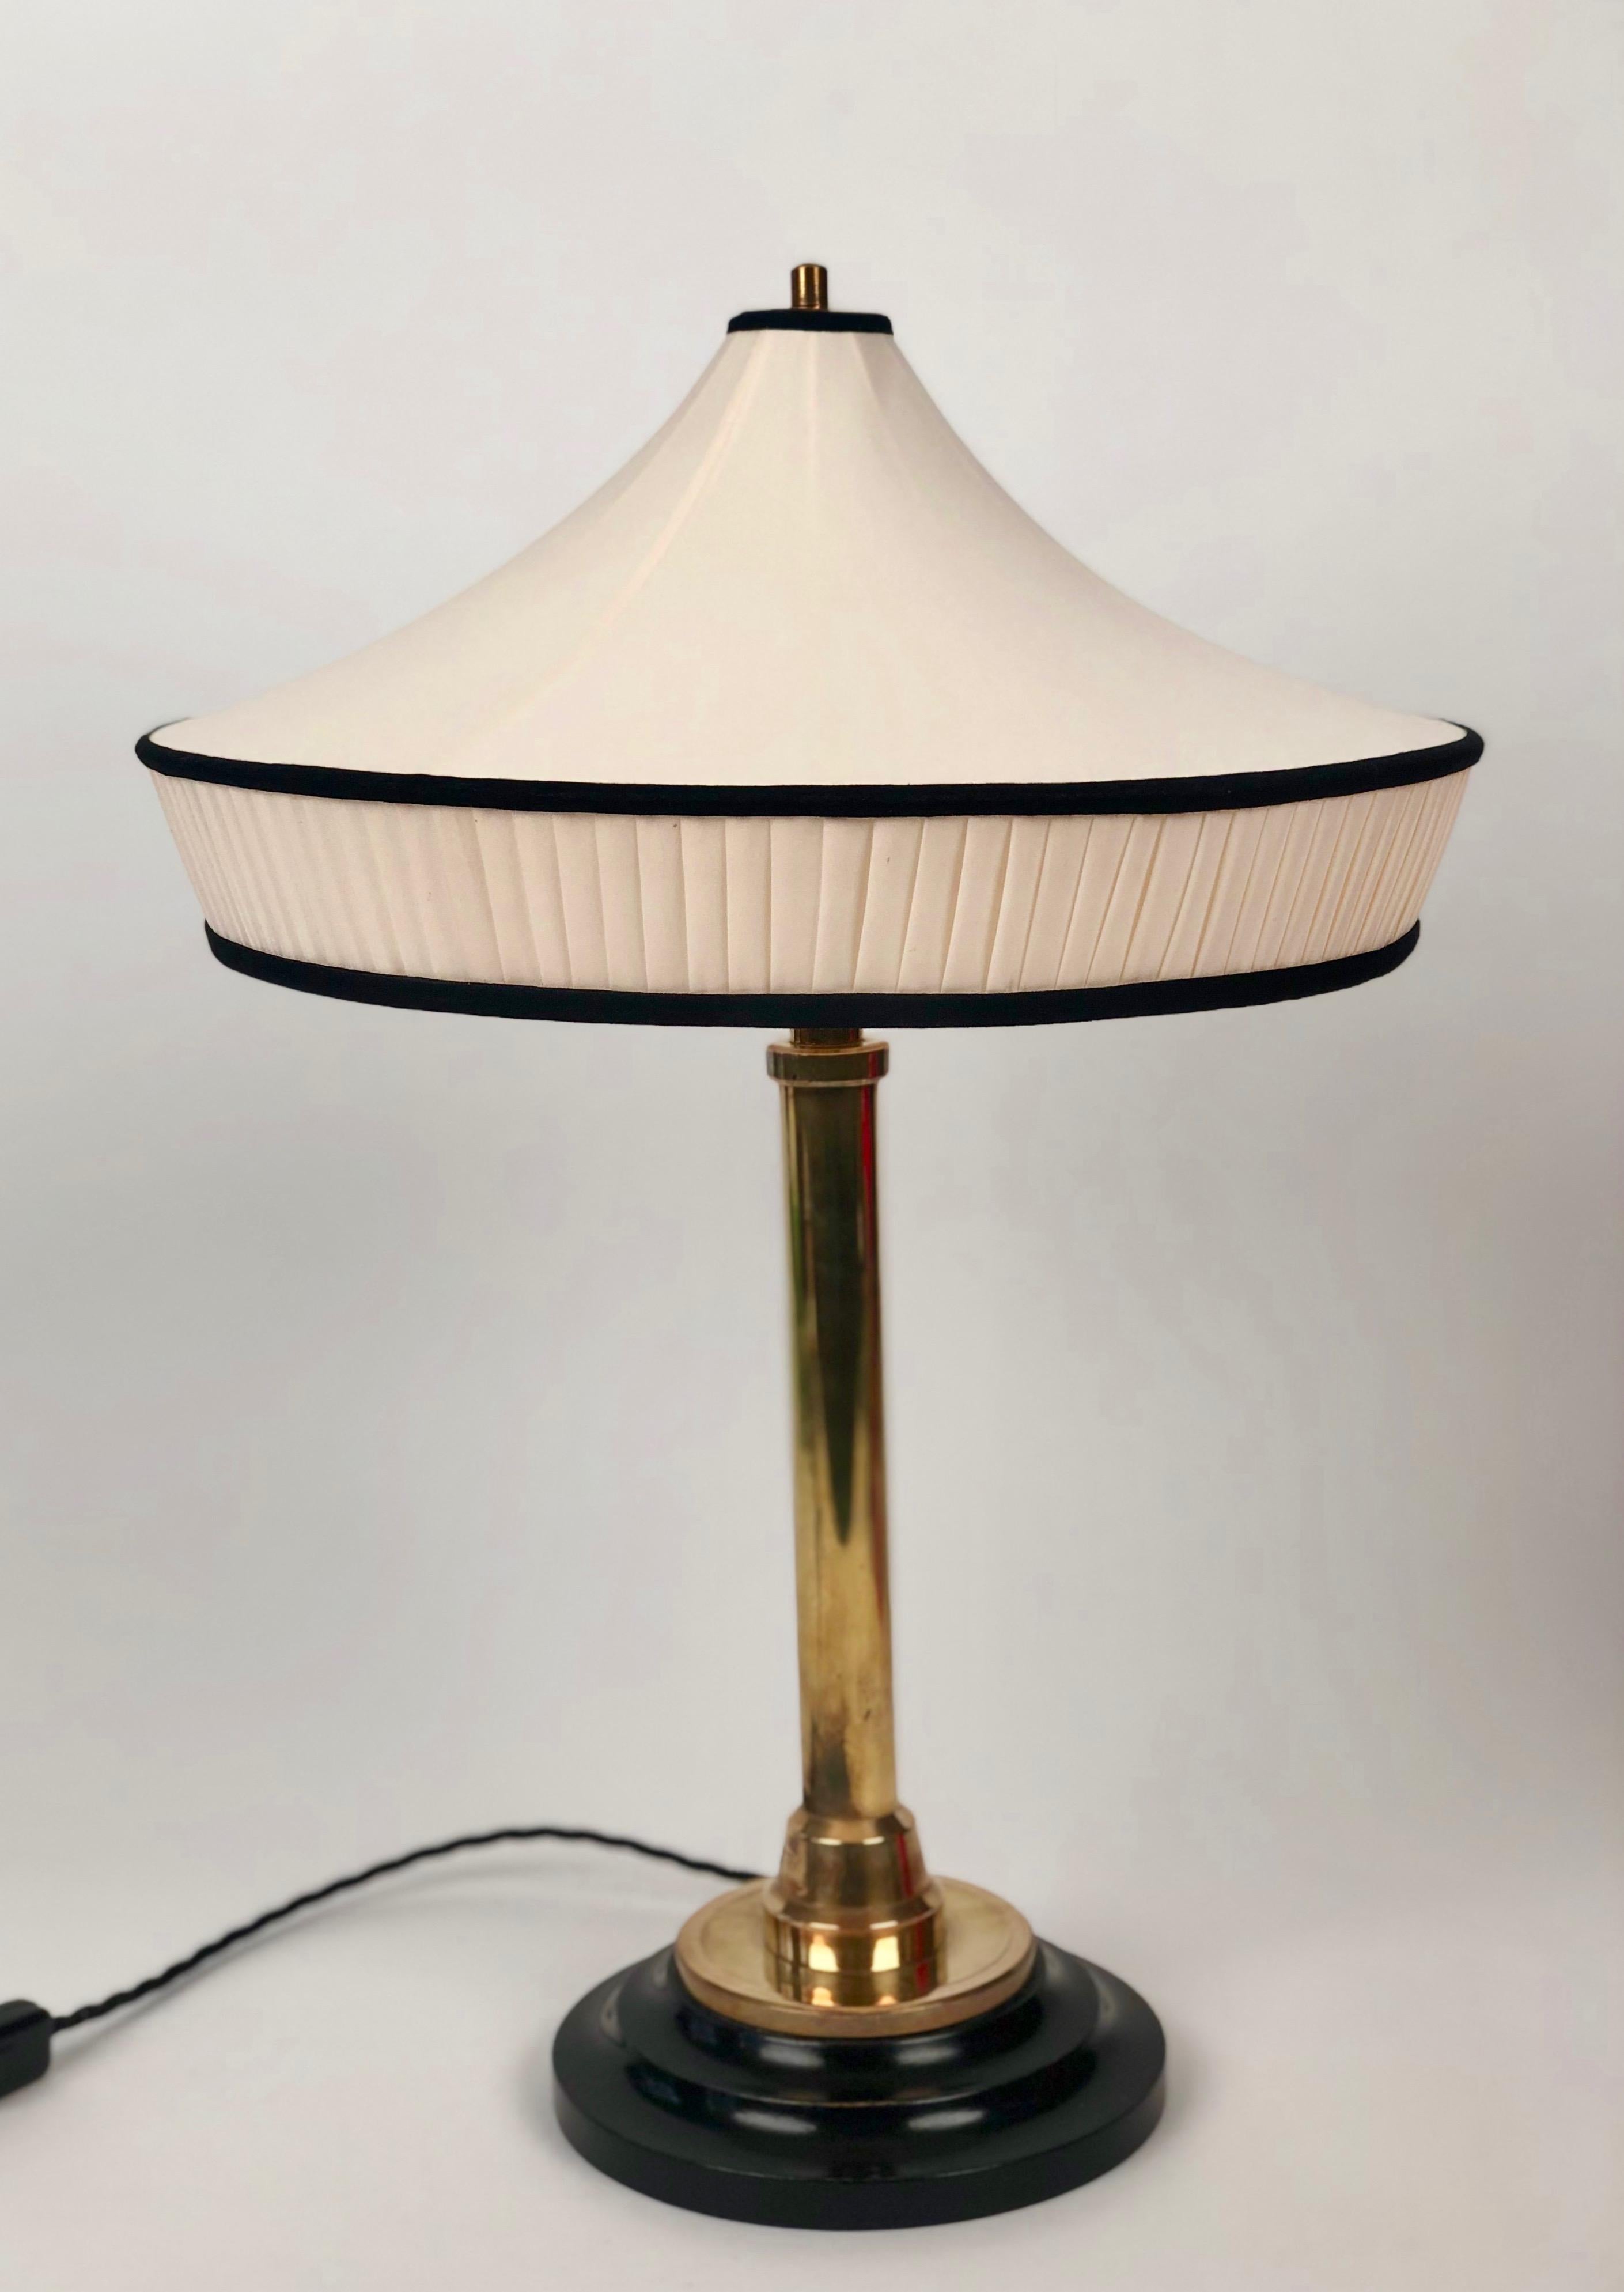 Just looking at this table lamp we can see that it exudes high quality design and manufacture that we have come to expect from Austrian design. From the lamp shade to the base of the lamp everything harmonises  to make a wonderful table lamp. From